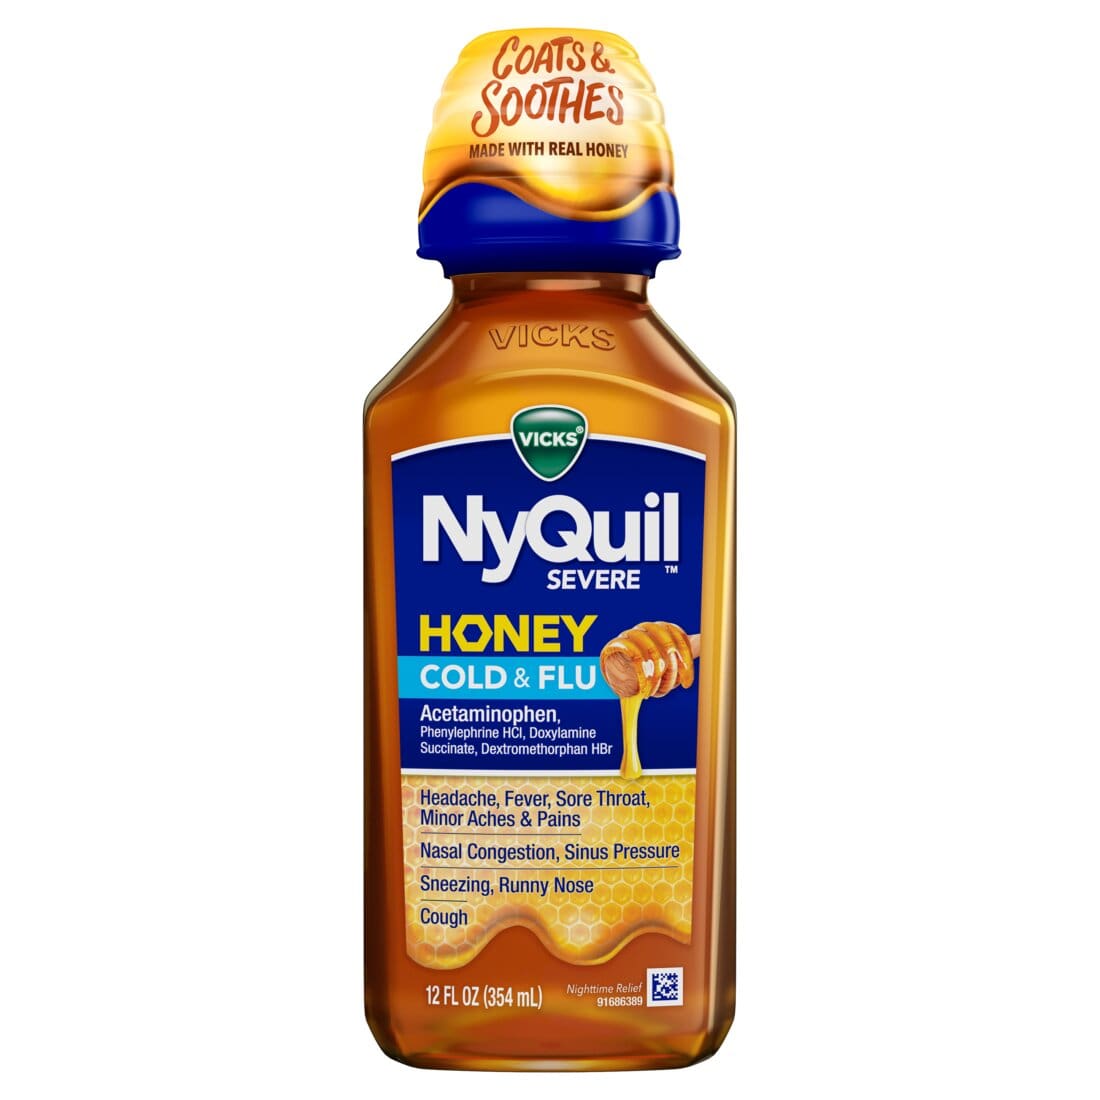 Vicks NyQuil SEVERE Honey Cold and Flu Medicine - 12oz/12pk